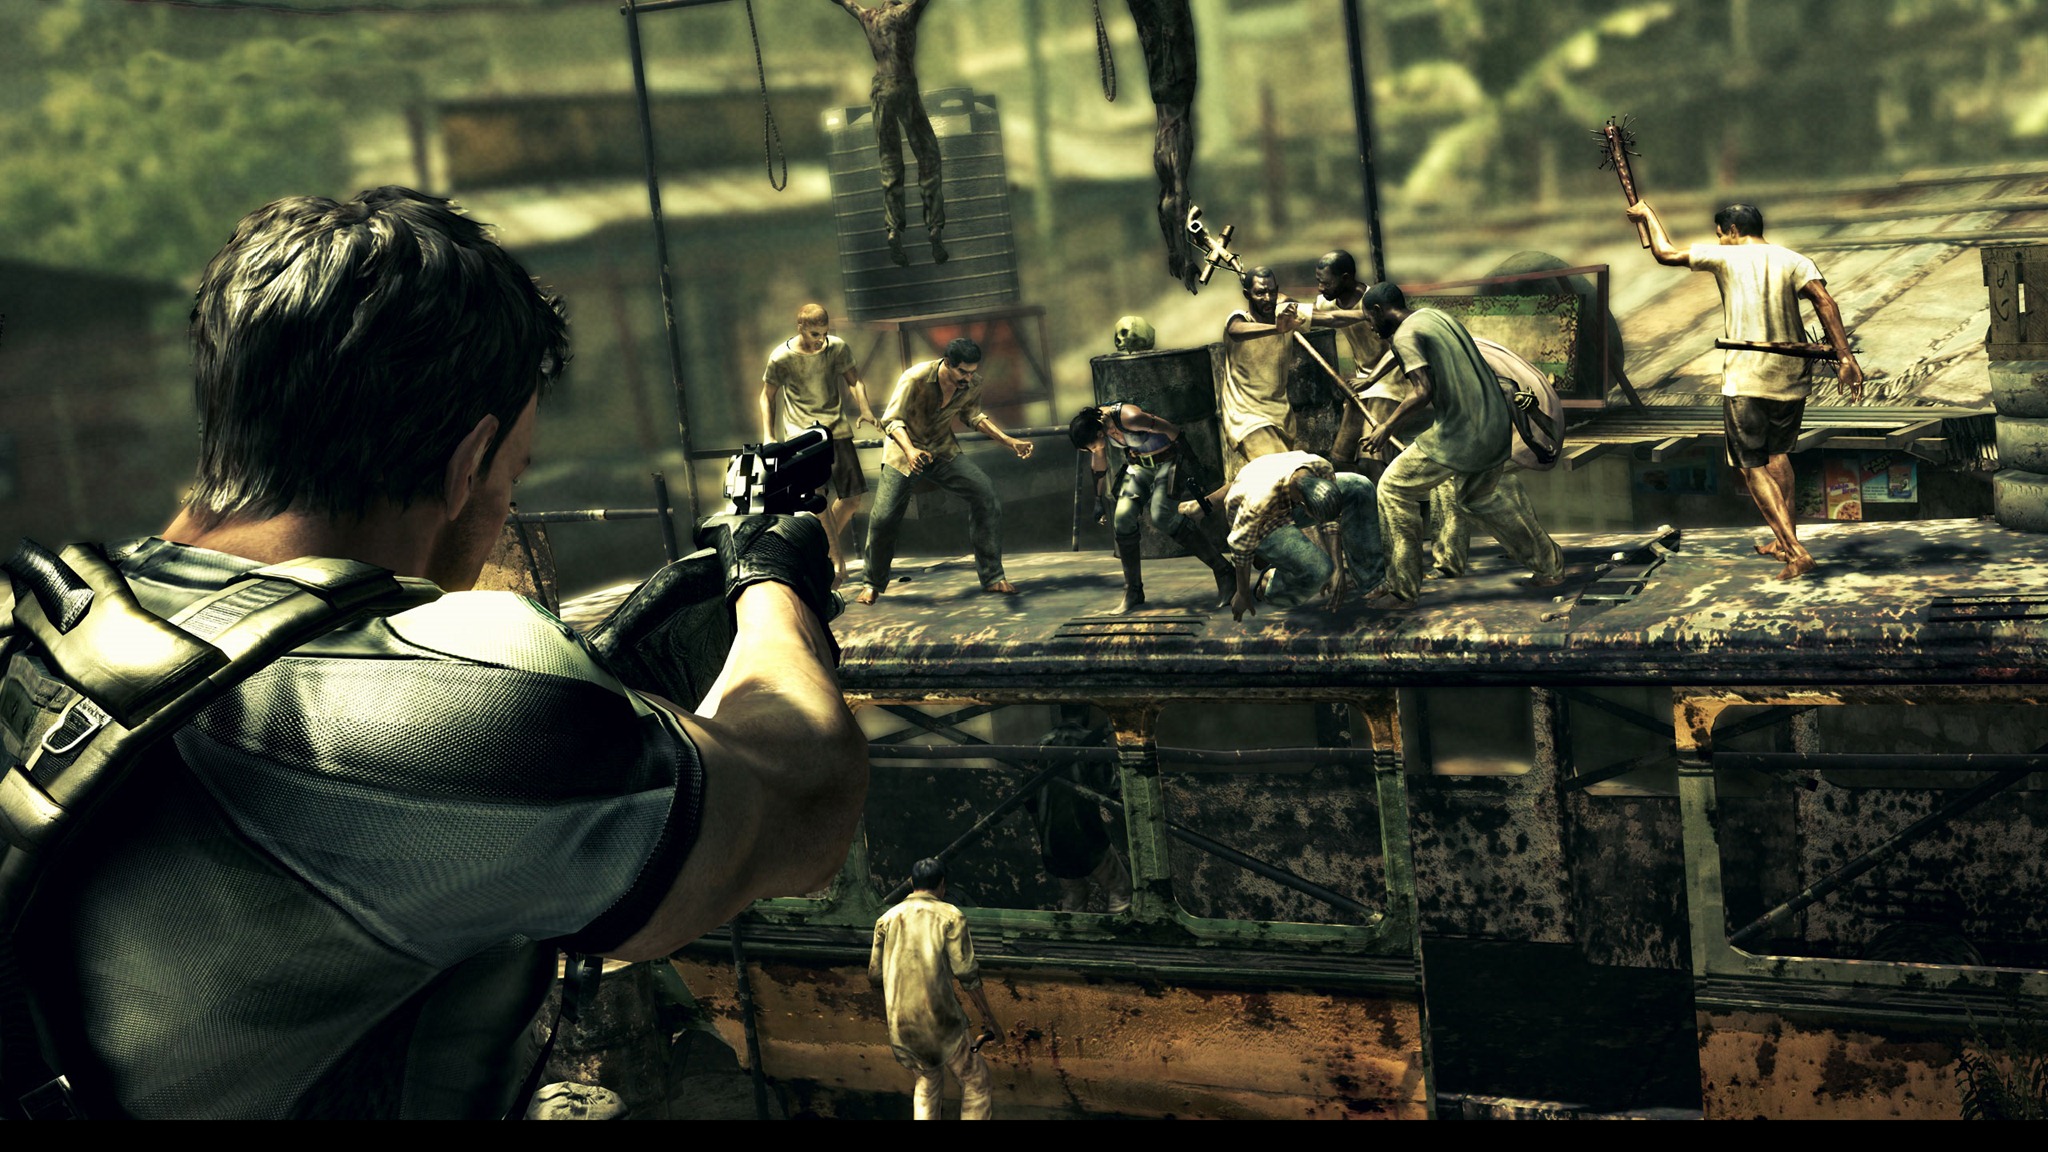 Do you think a Resident Evil 5 Remake is possible? I remember that